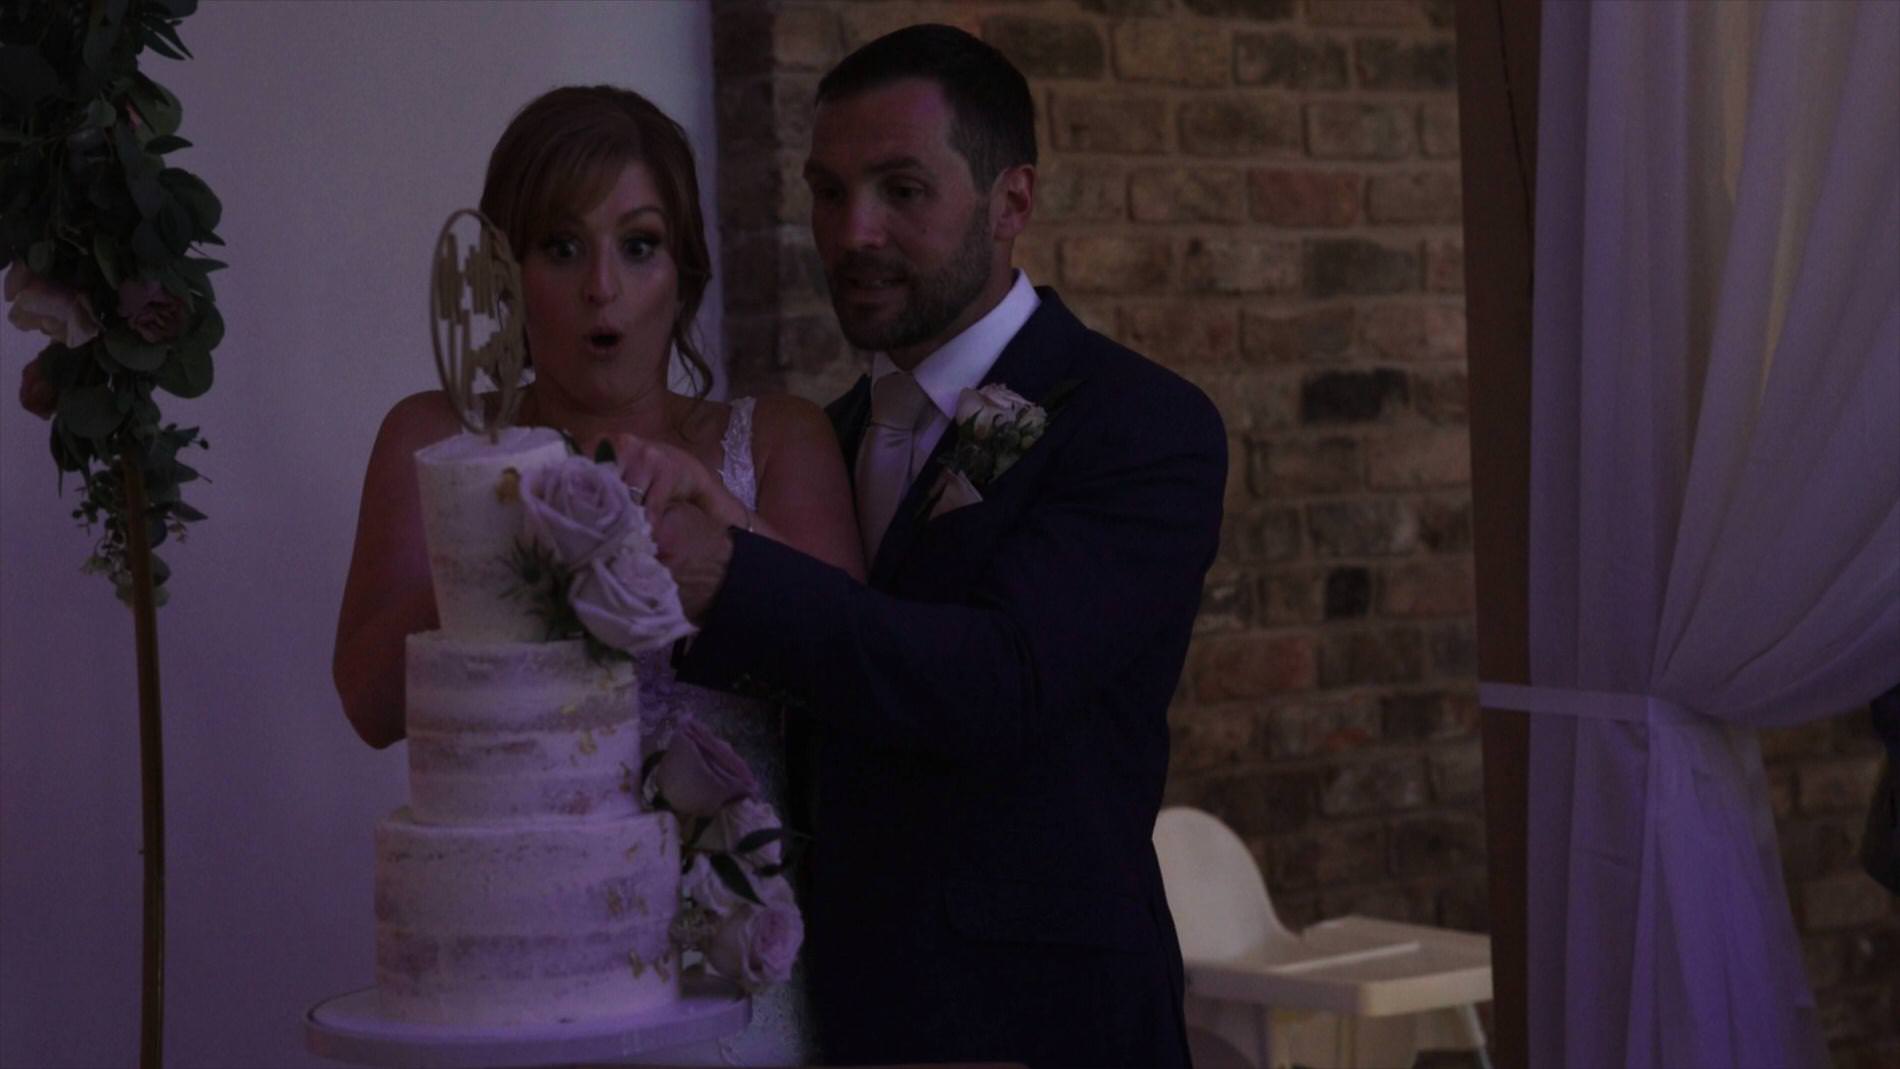 the couple nearly knock the cake over during the cake cut